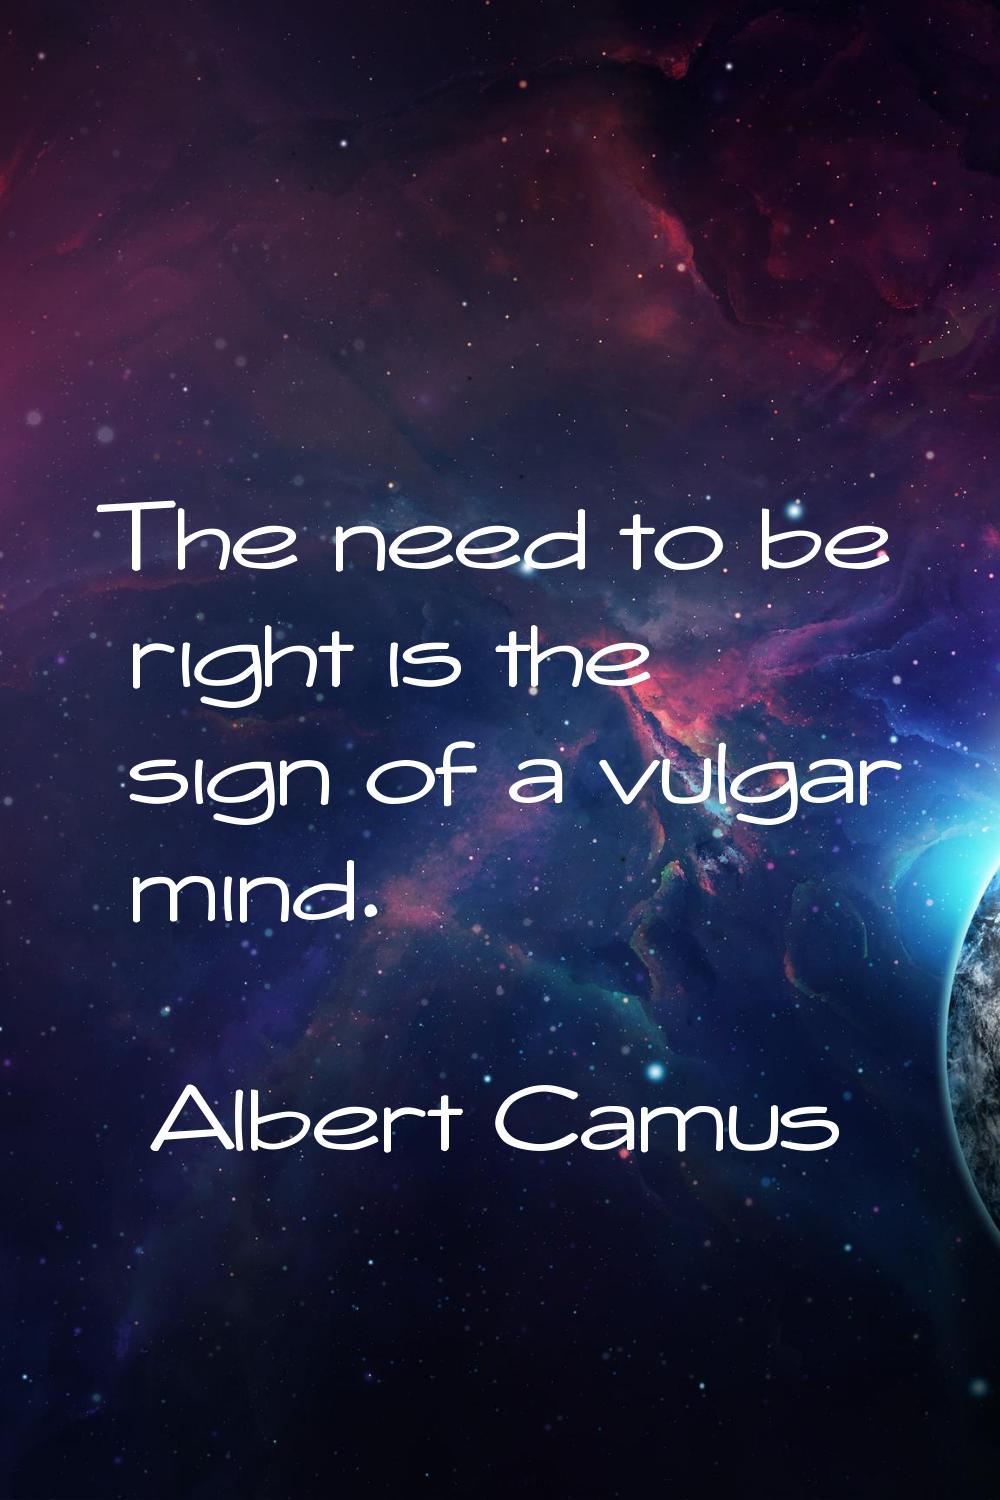 The need to be right is the sign of a vulgar mind.